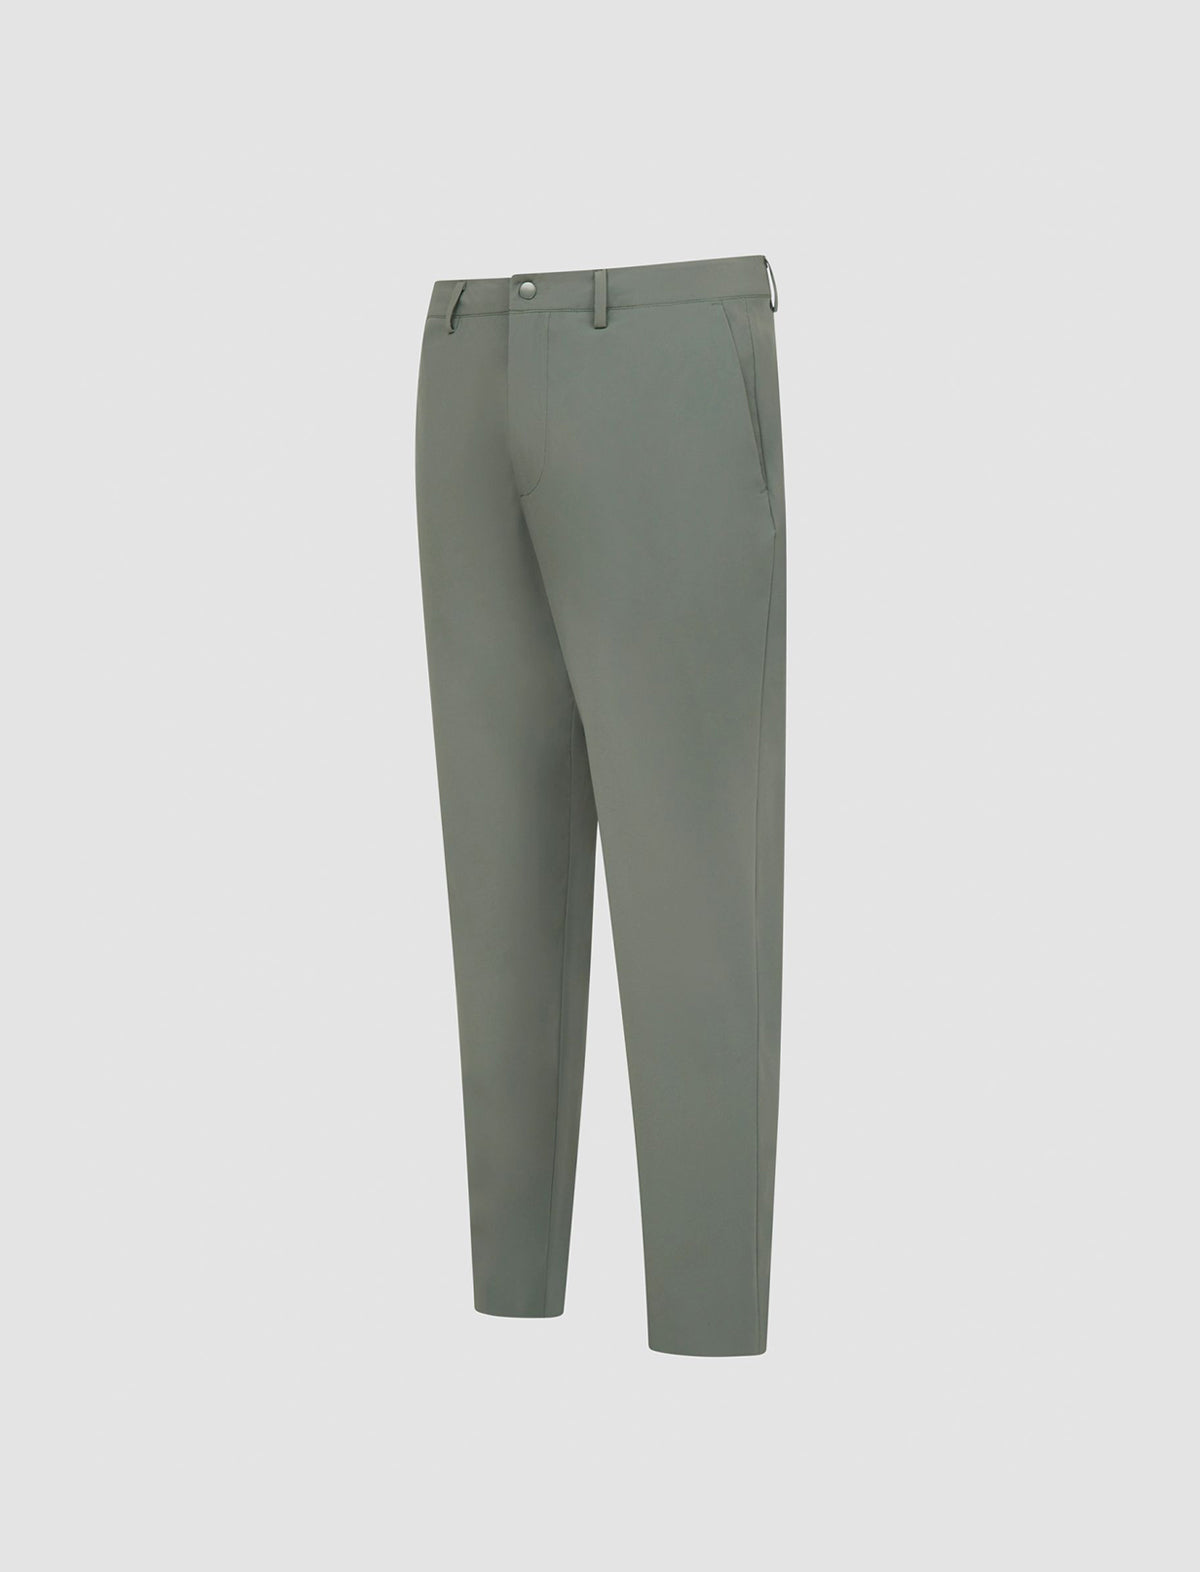 MANORS GOLF The Course Trouser in Green